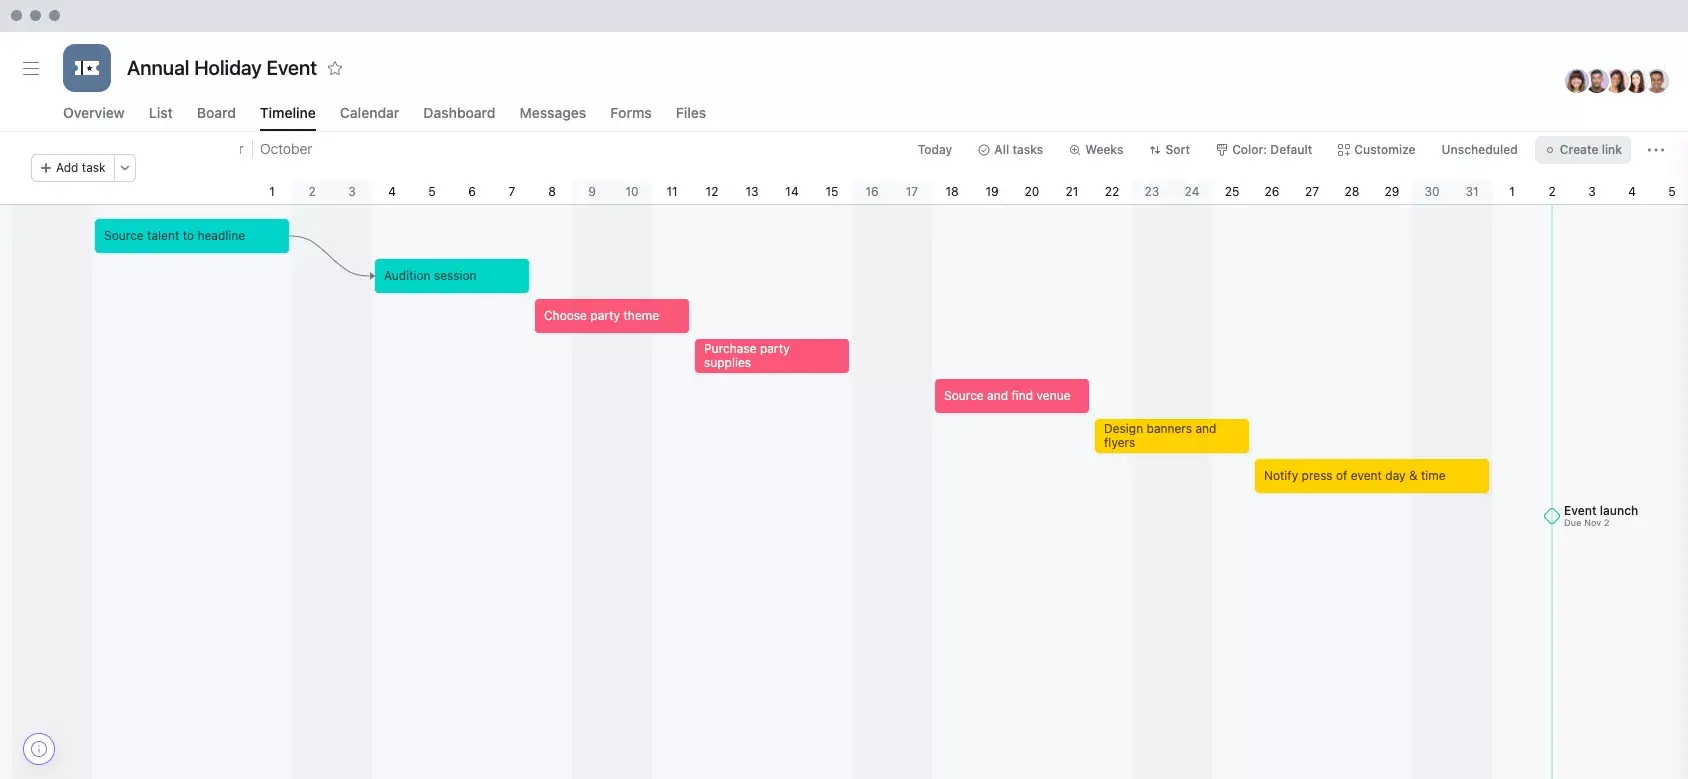 [Old Product UI] Project in Asana before fast tracking (Timeline View)